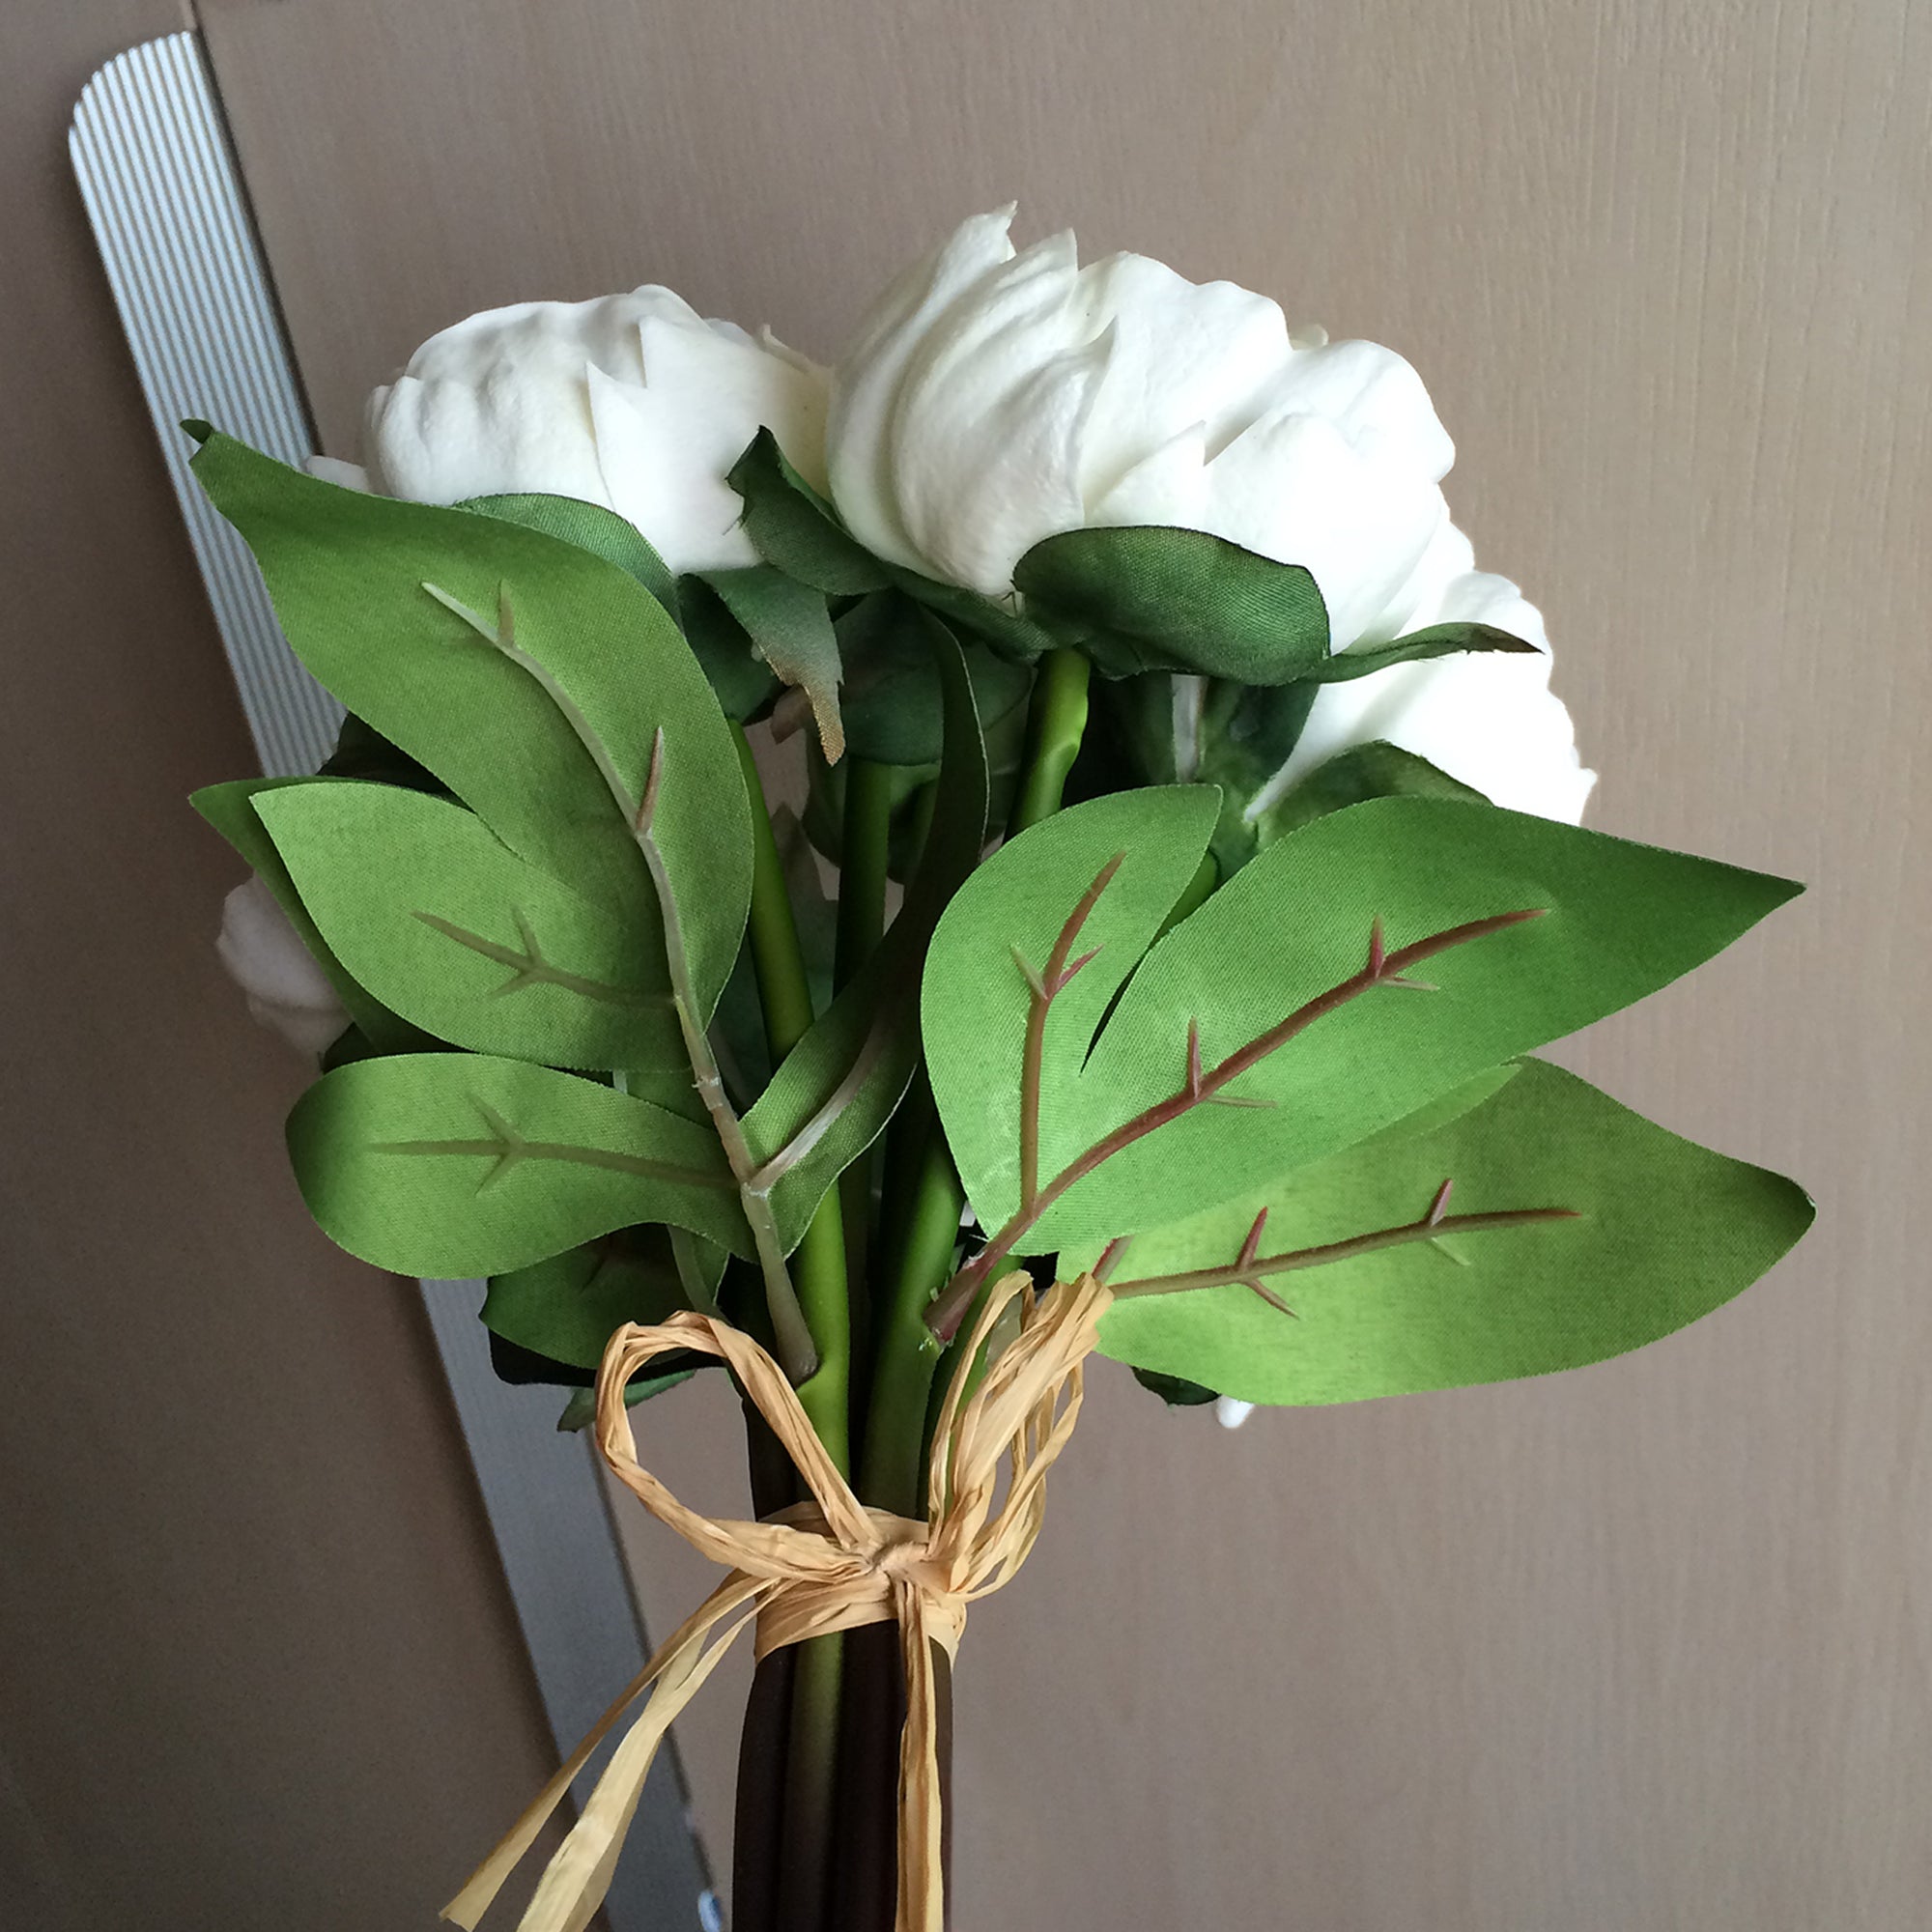 Real Touch Flower White Peony Bouquet for Bridal Flower Table Centerpieces